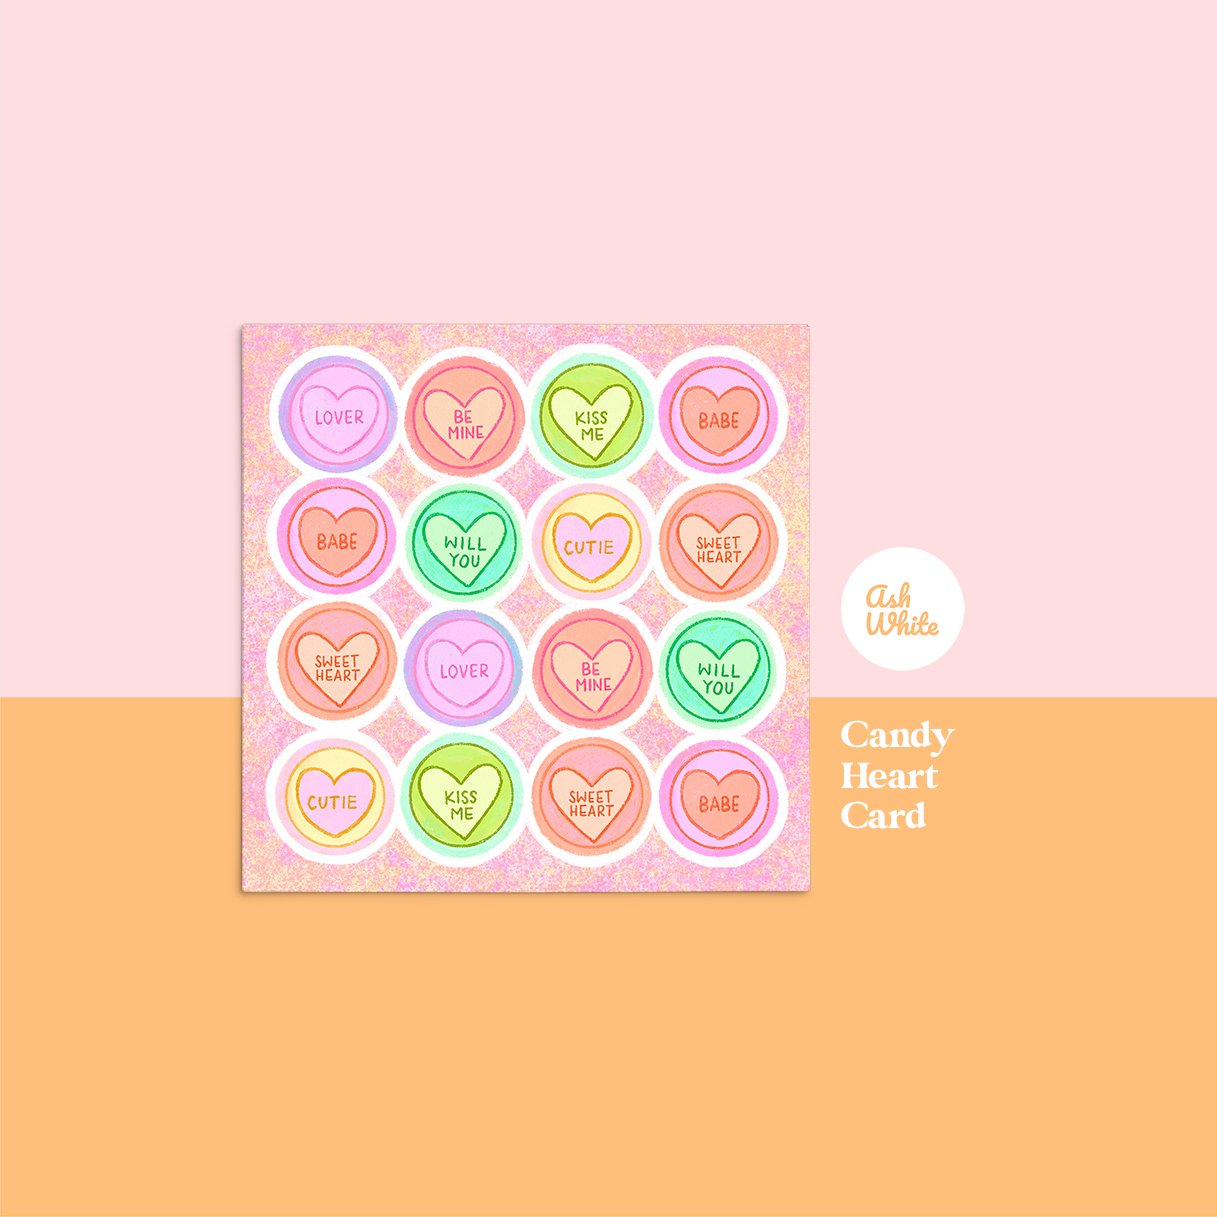 CANDY HEART CARD by Ash White